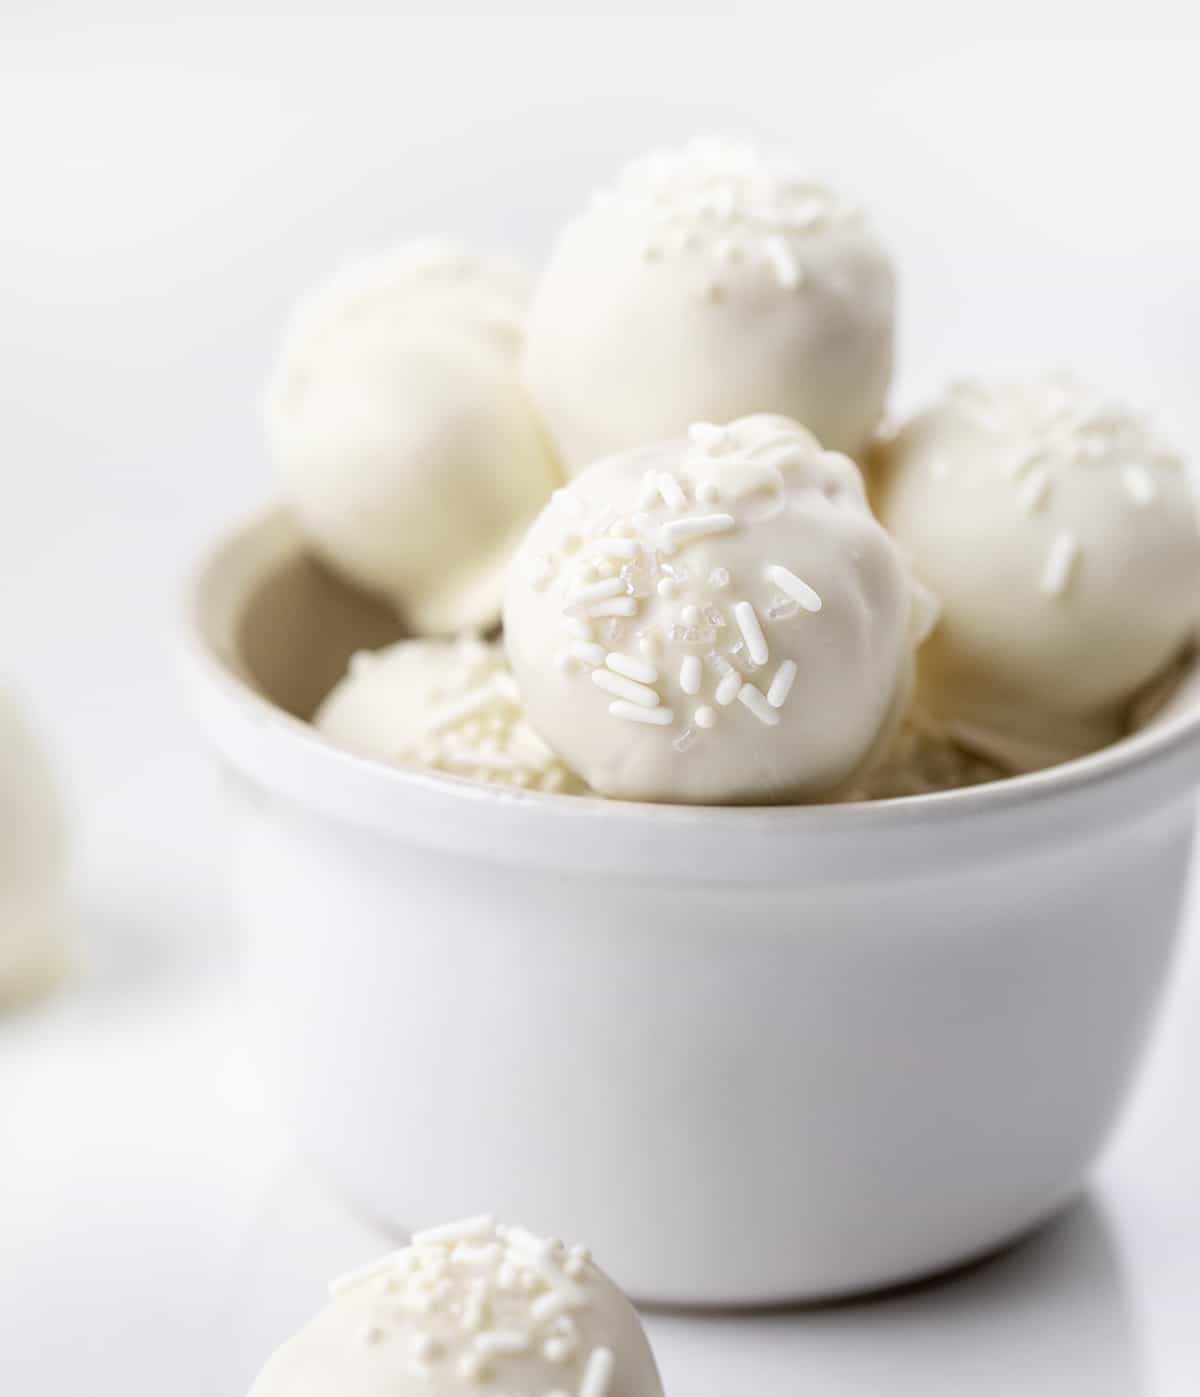 Sugar Cookie Truffles in a White Bowl on a White Counter.